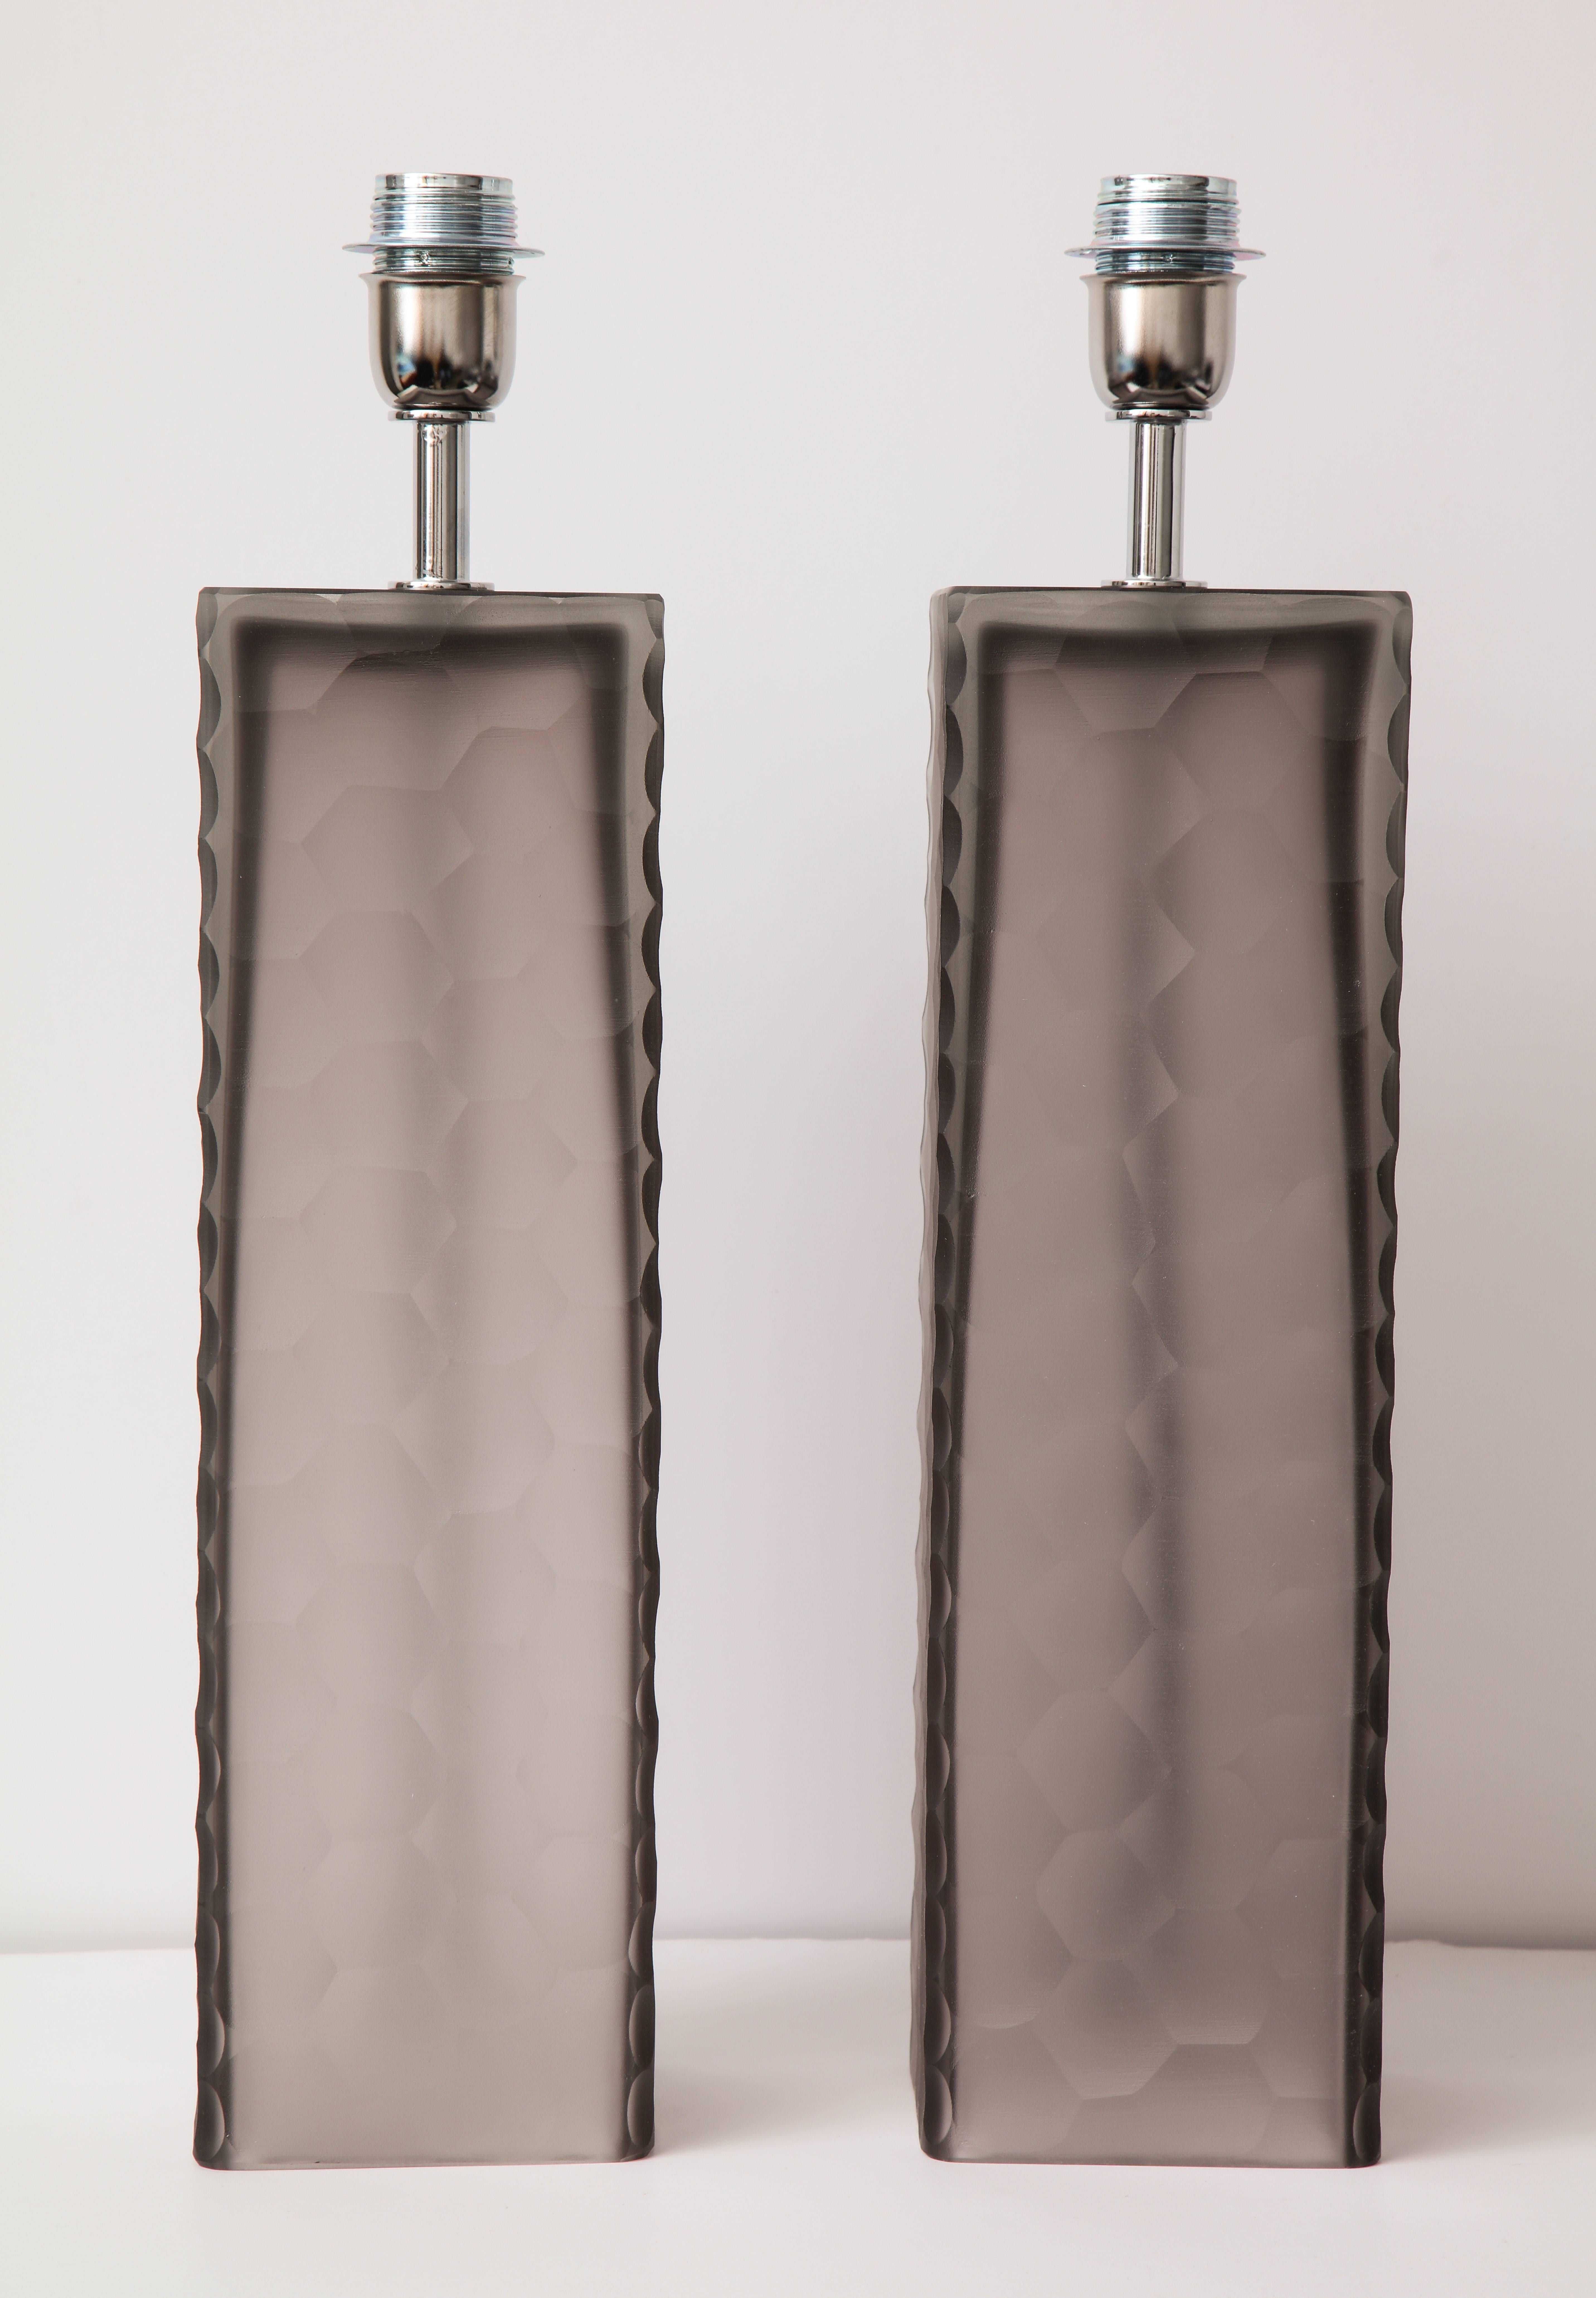 This pair of taupe grey or gray Murano glass lamps was made of hand casted blocks of Murano glass with a beehive-like stamped design texture. Signed by the Murano glass master, Alberto Dona. Wired for U.S. use.  These lamps will come with a uno